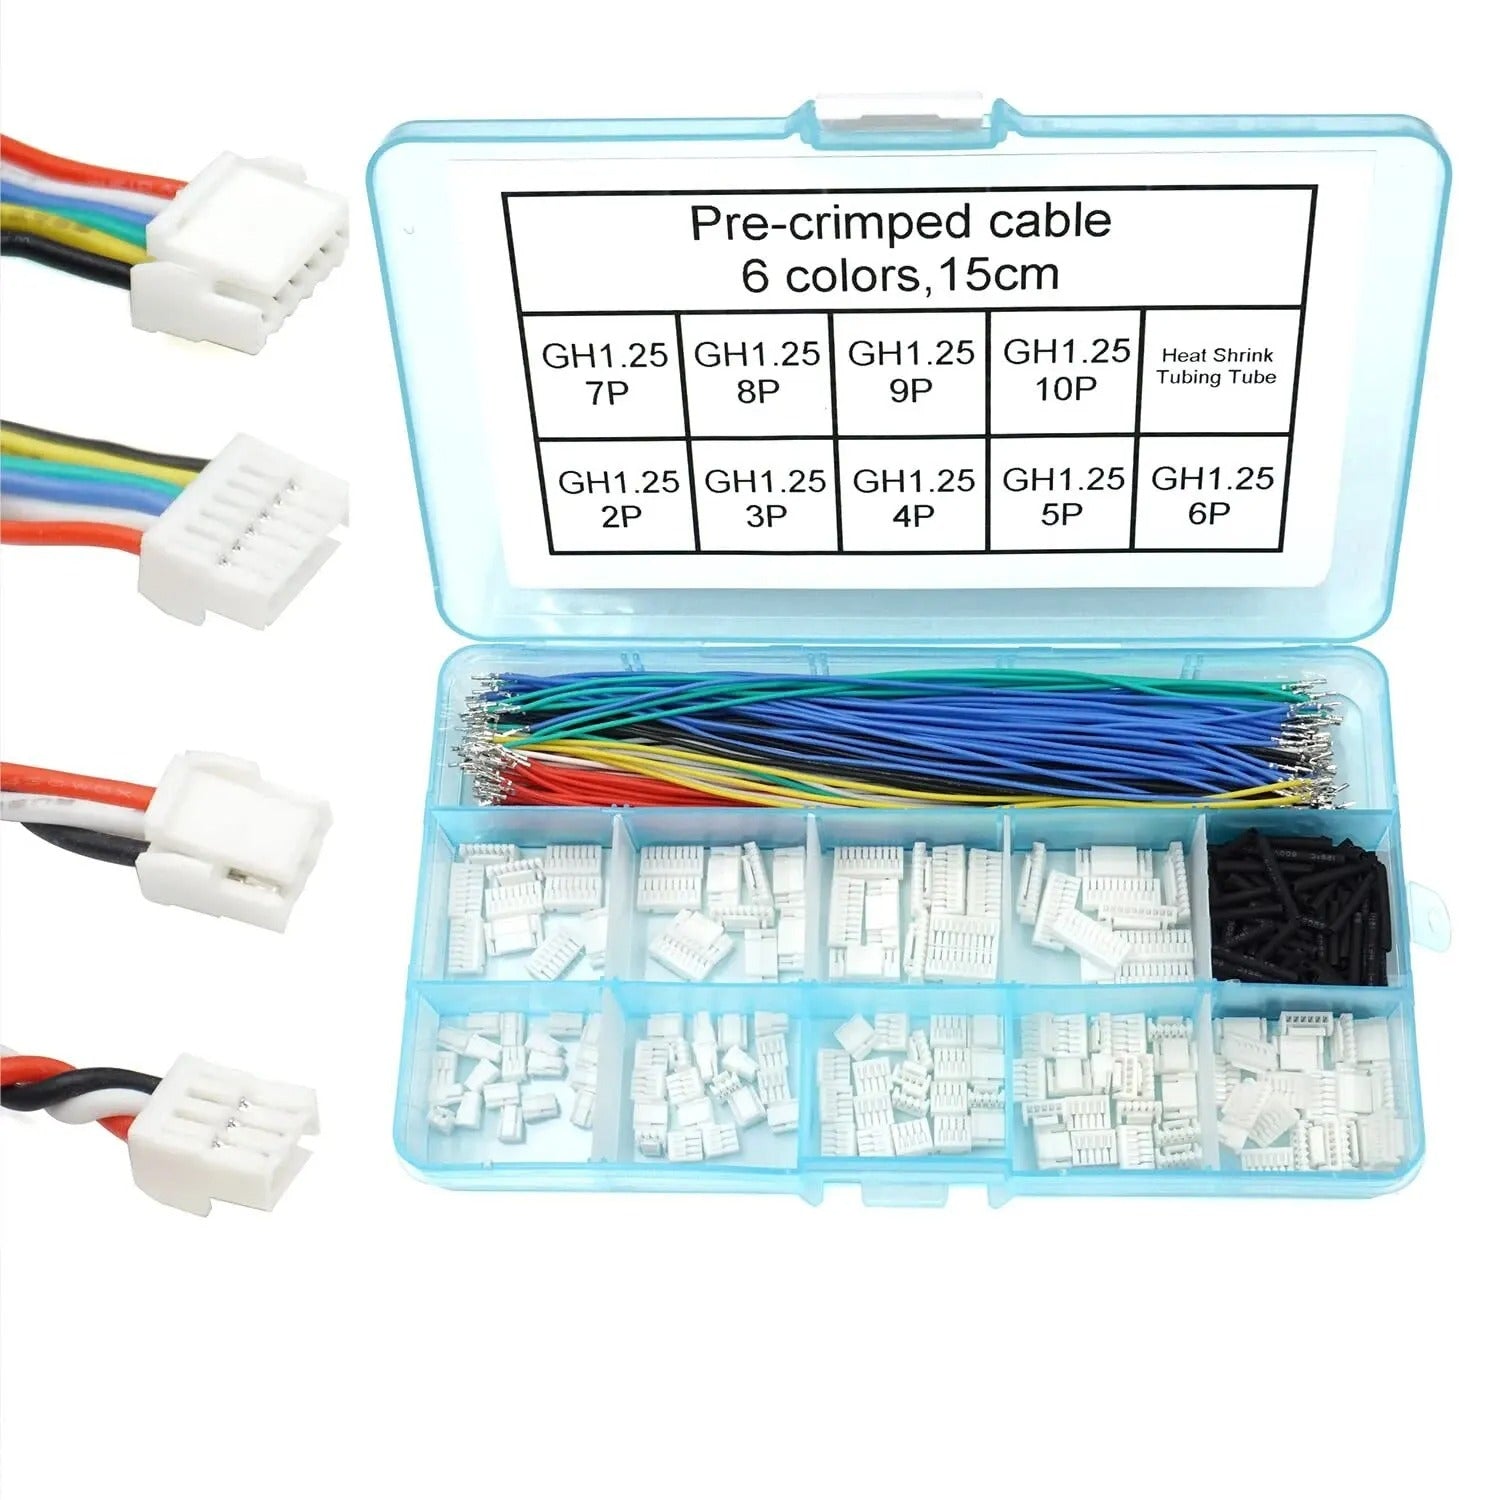 260pc 2.54mm XH Connector Socket Kit with Pre-Crimped Cable Wire & Shrink Tubing 2/3/4/5/6/7 JST Adapter Cable Male and Female